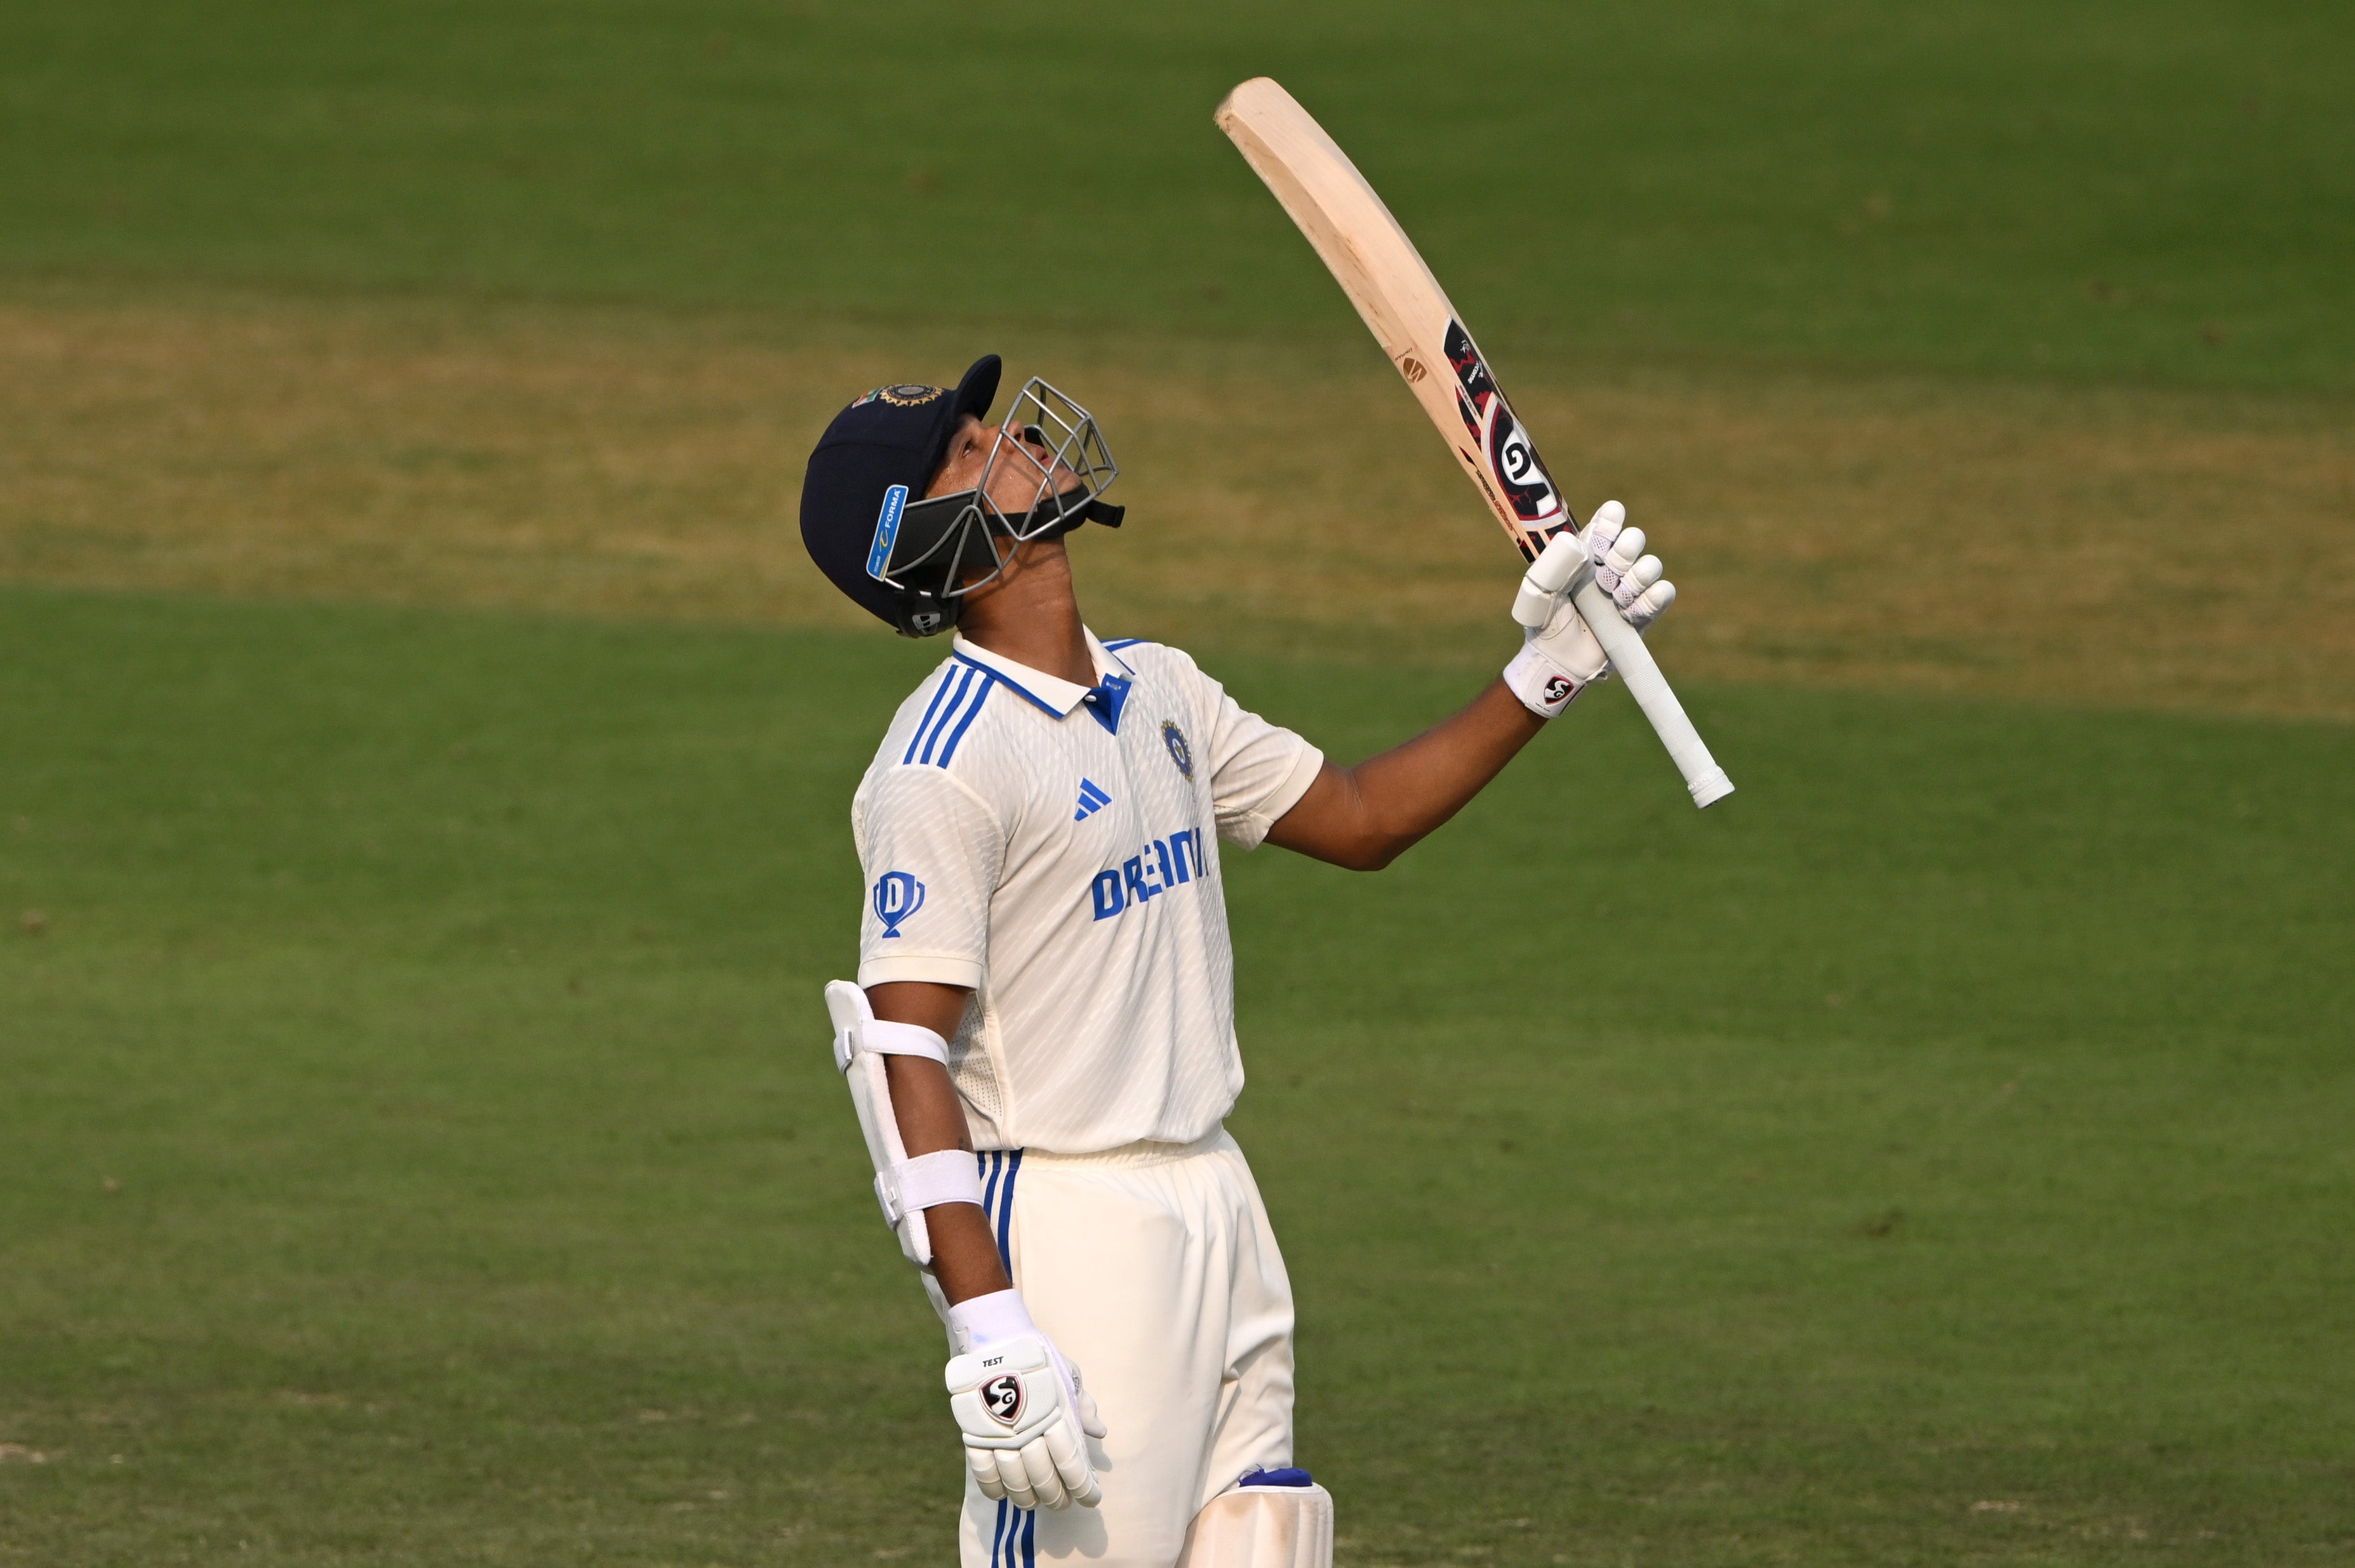 Jaiswal took time to play himself in before accelerating towards his century